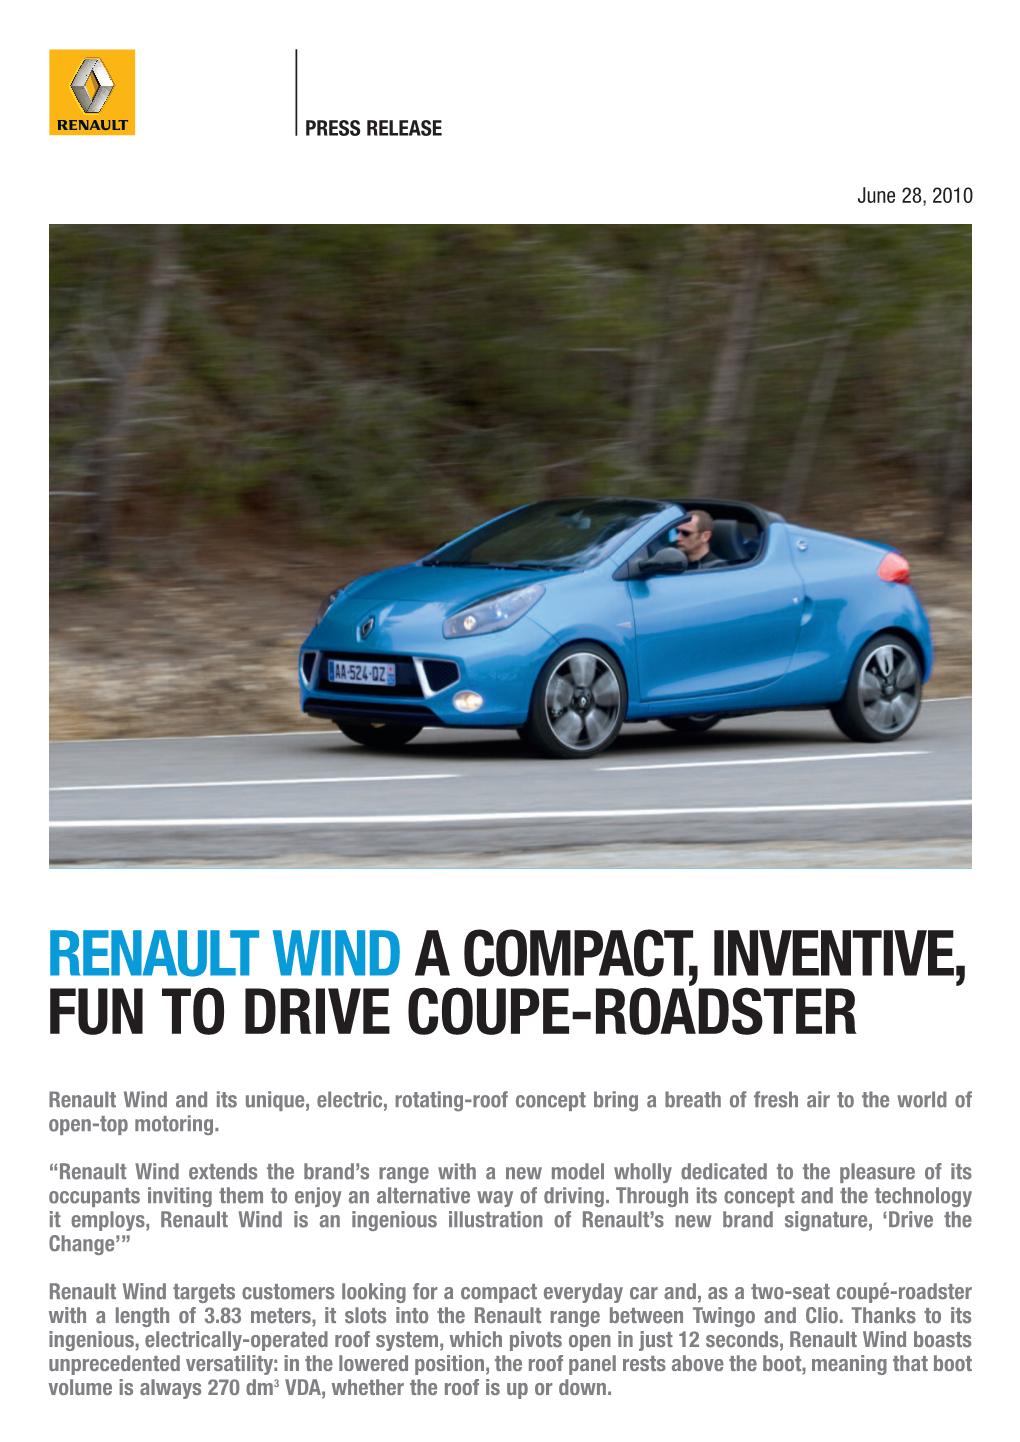 Renault Wind a Compact, Inventive, Fun to Drive